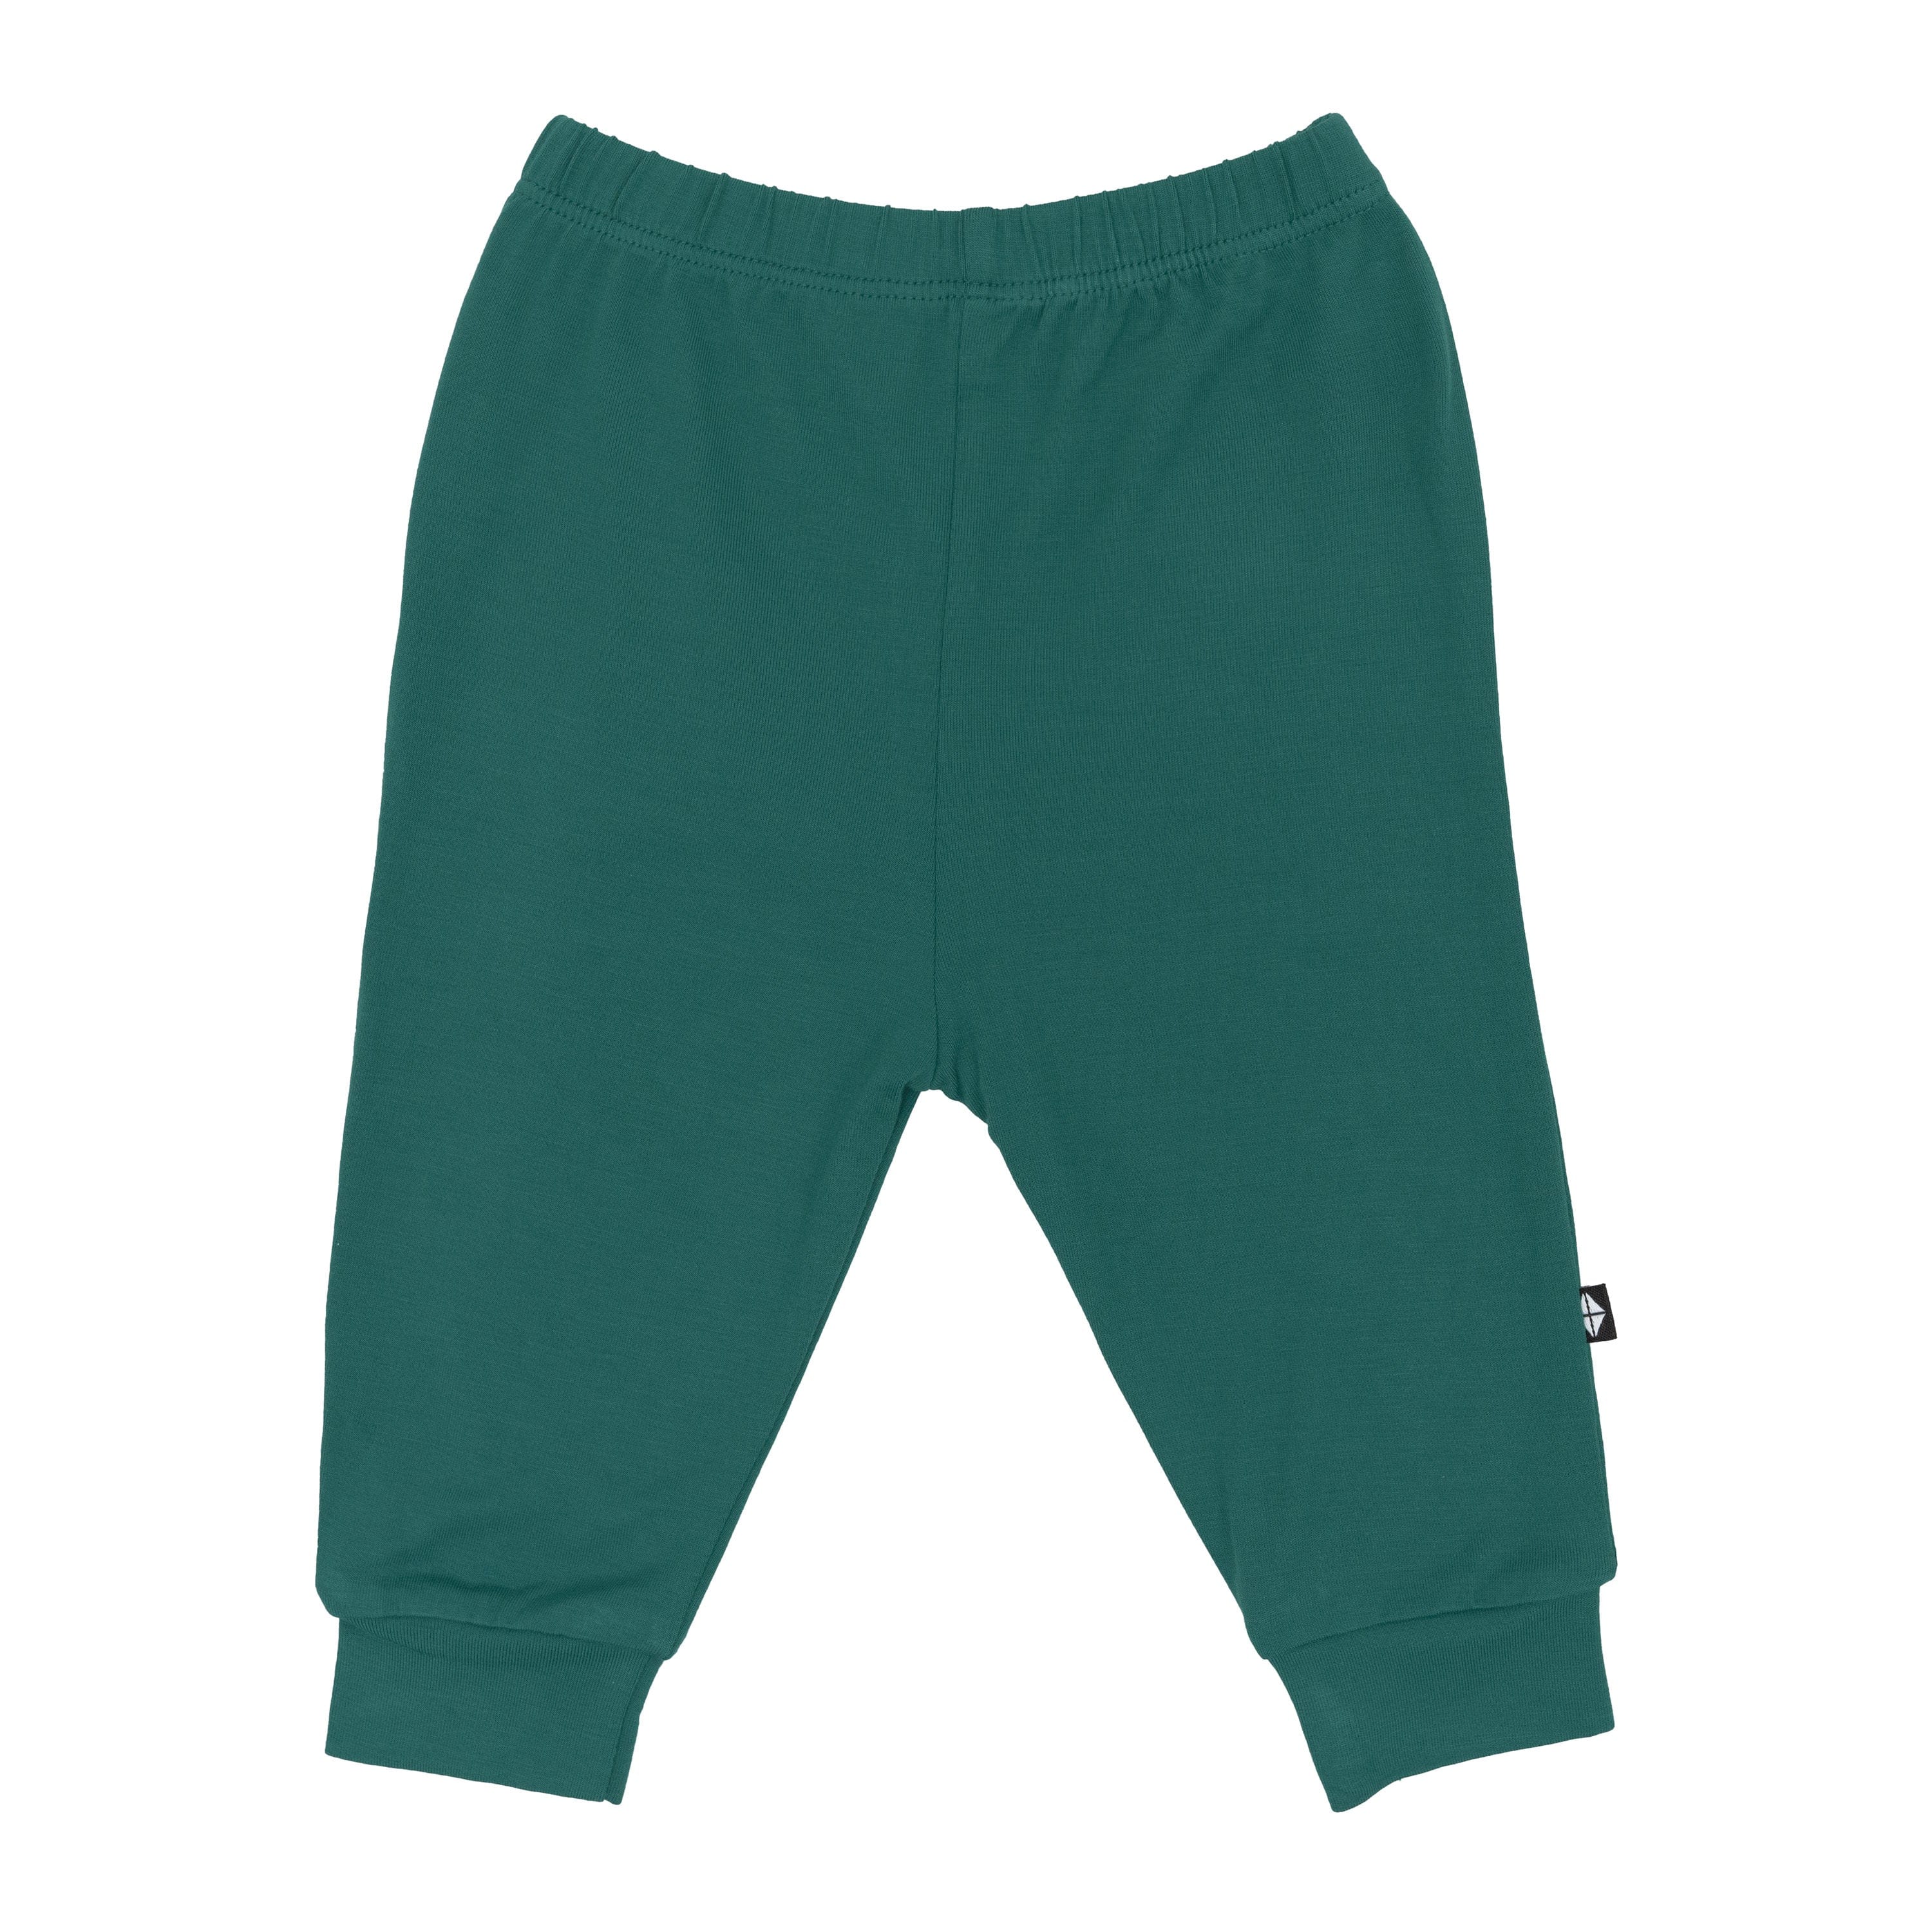 Kyte Baby Pants Pant in Emerald